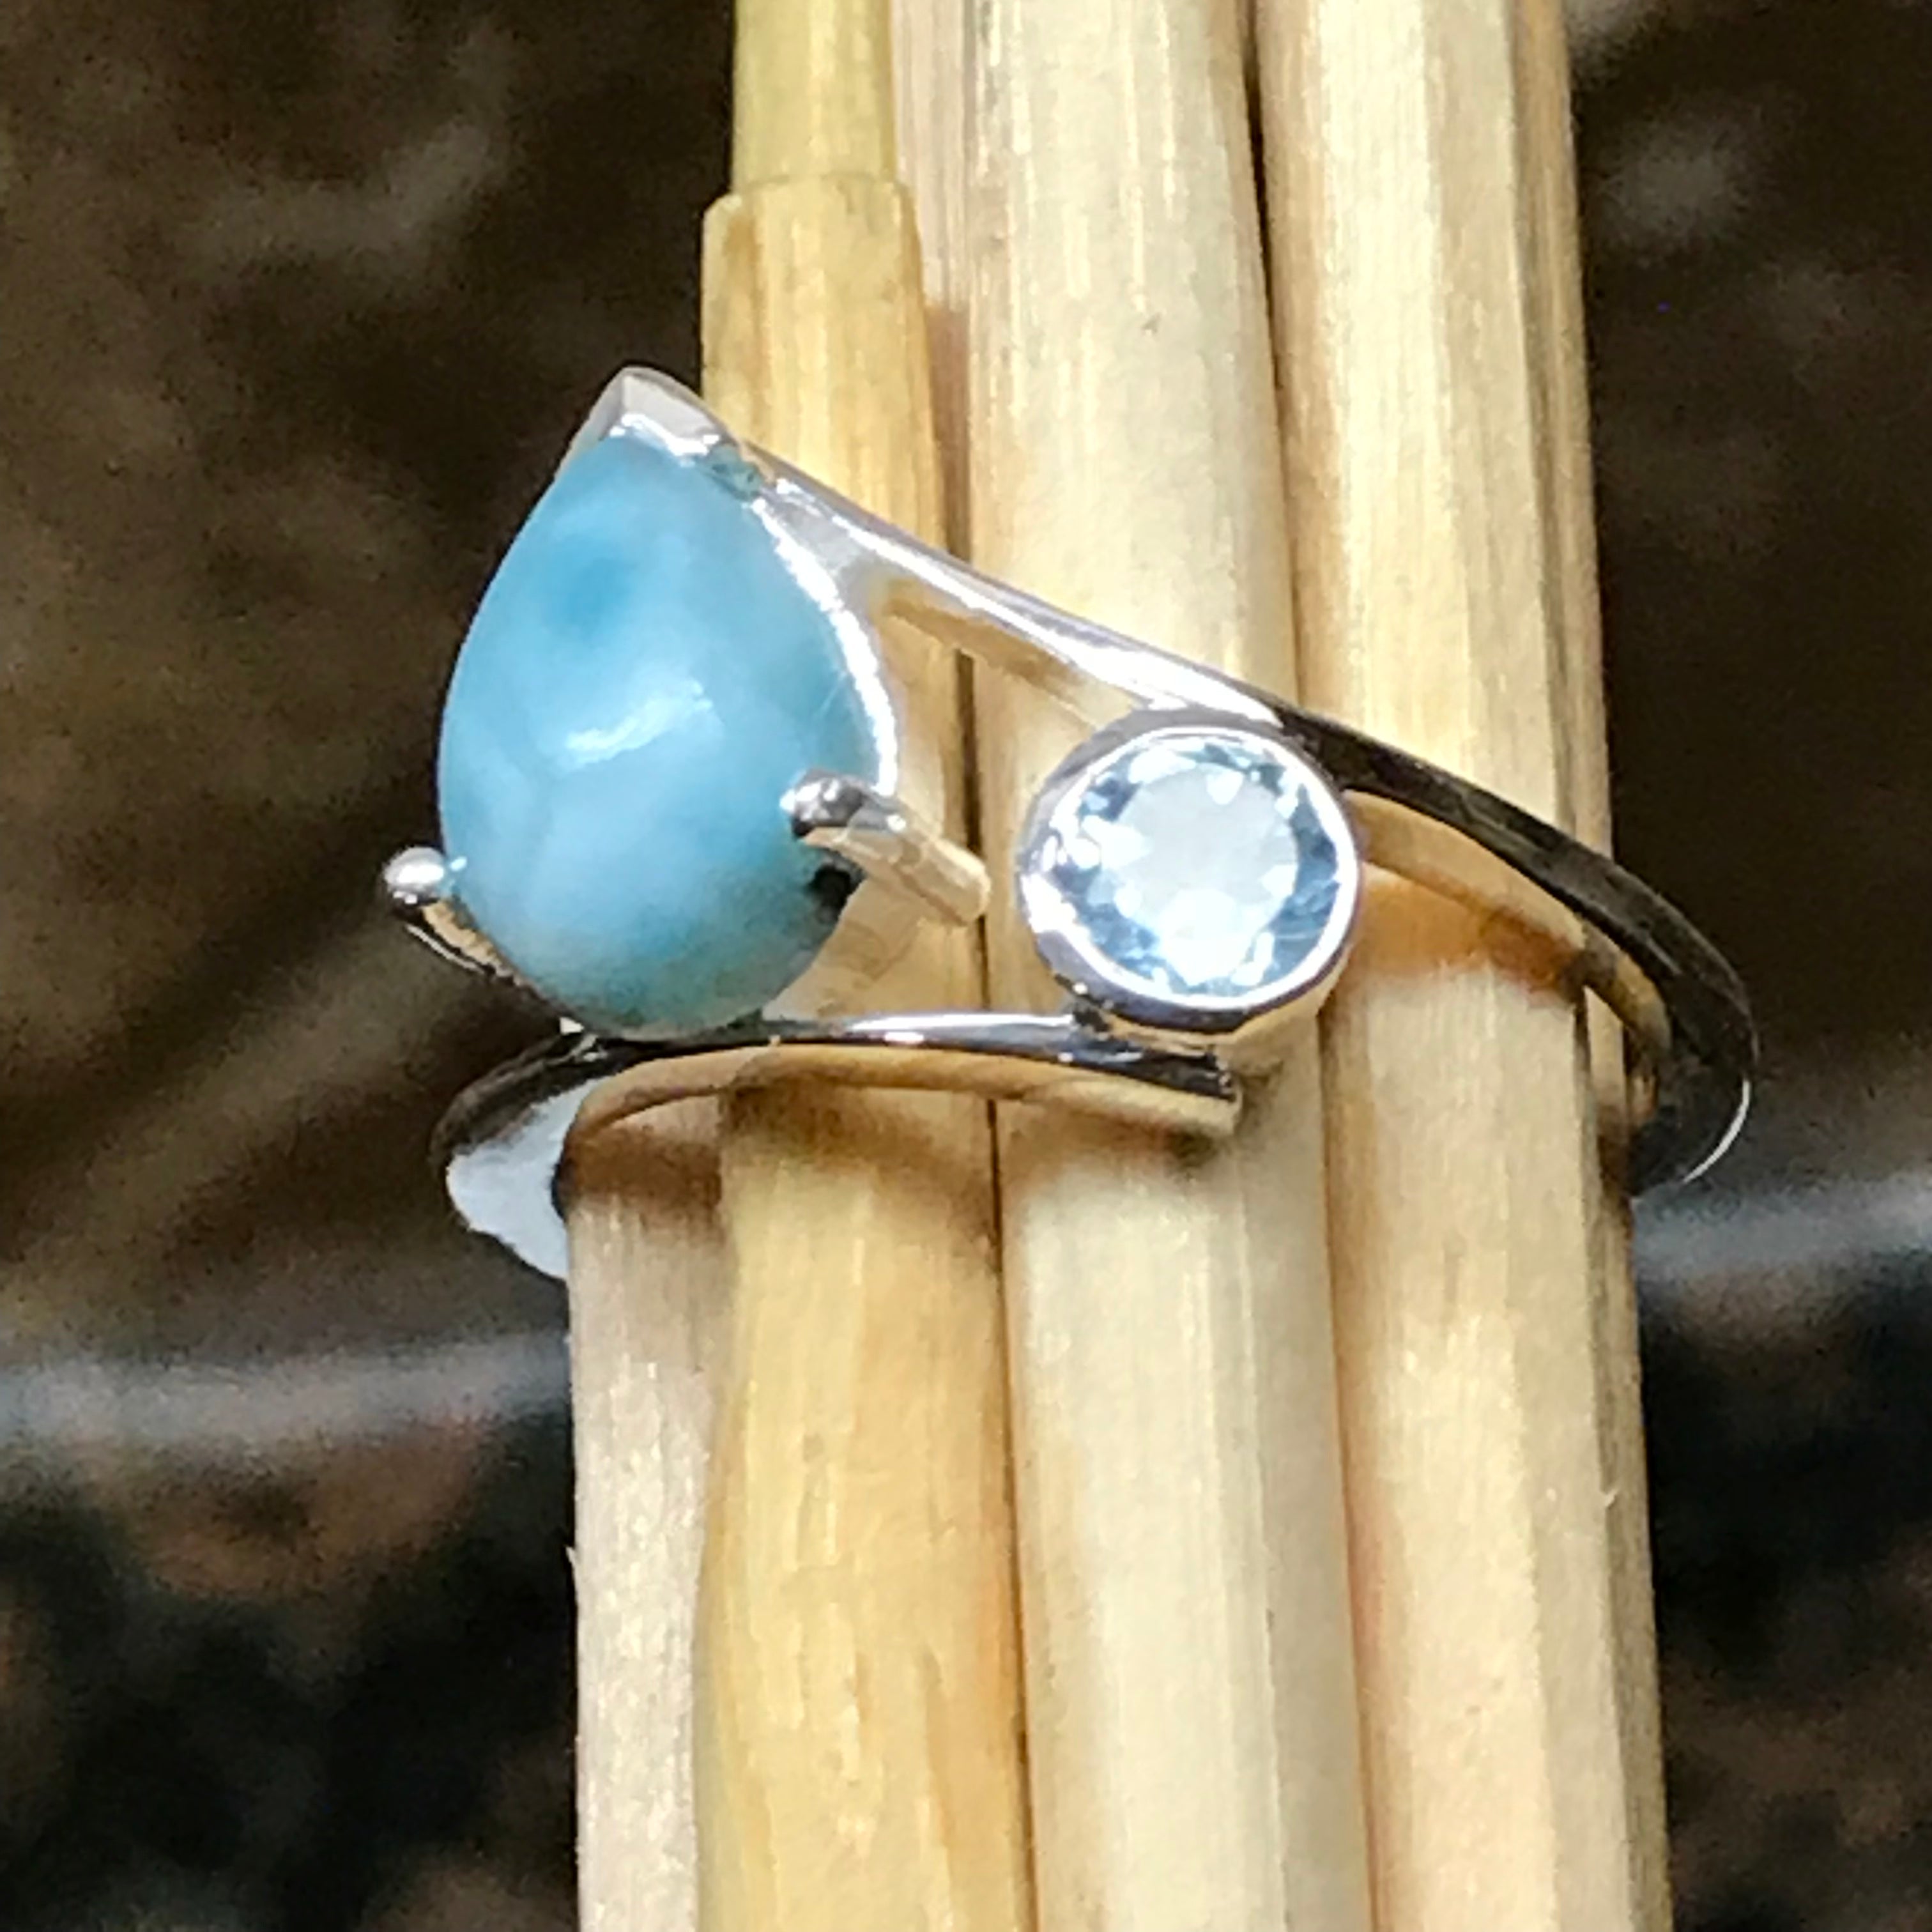 Natural Dominican Larimar 925 Solid Sterling Silver Ring Size 6, 7, 8, 9 - Natural Rocks by Kala